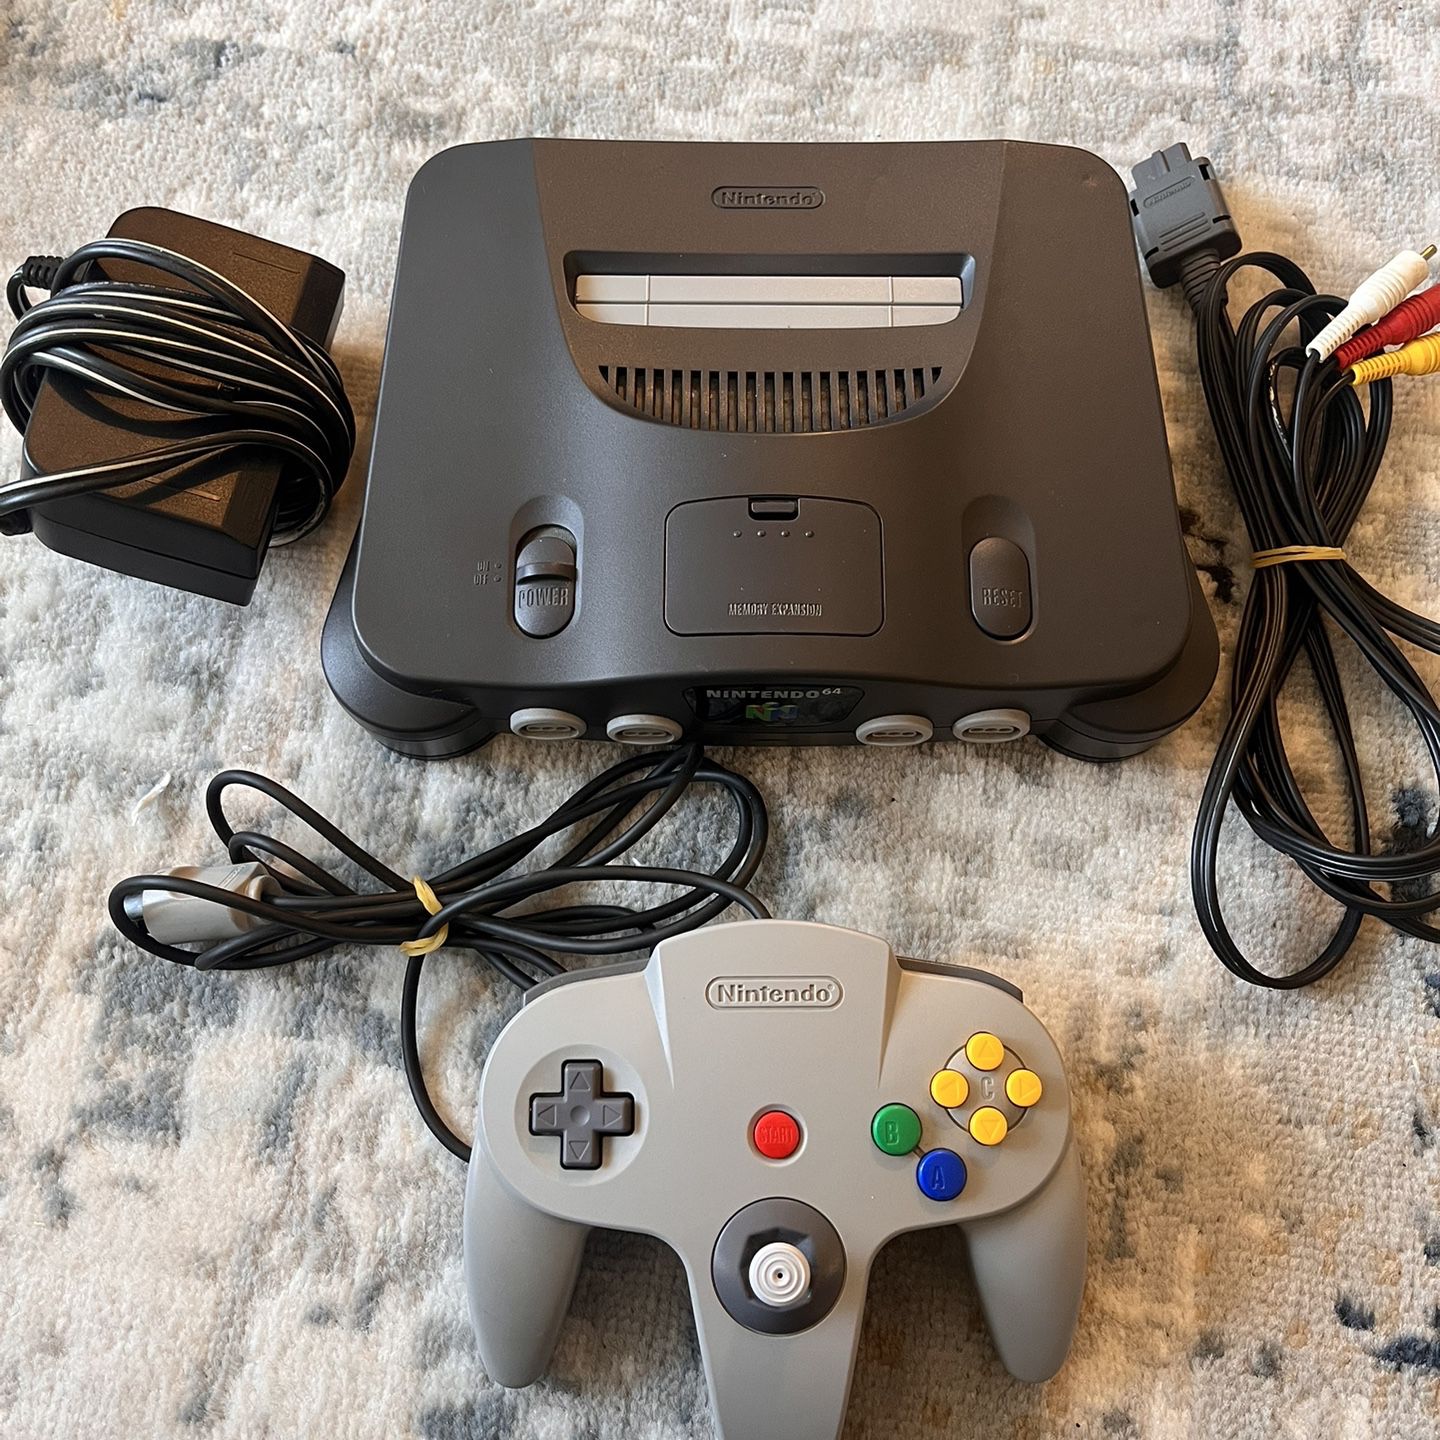 Nintendo 64 System for Sale in New York, NY - OfferUp